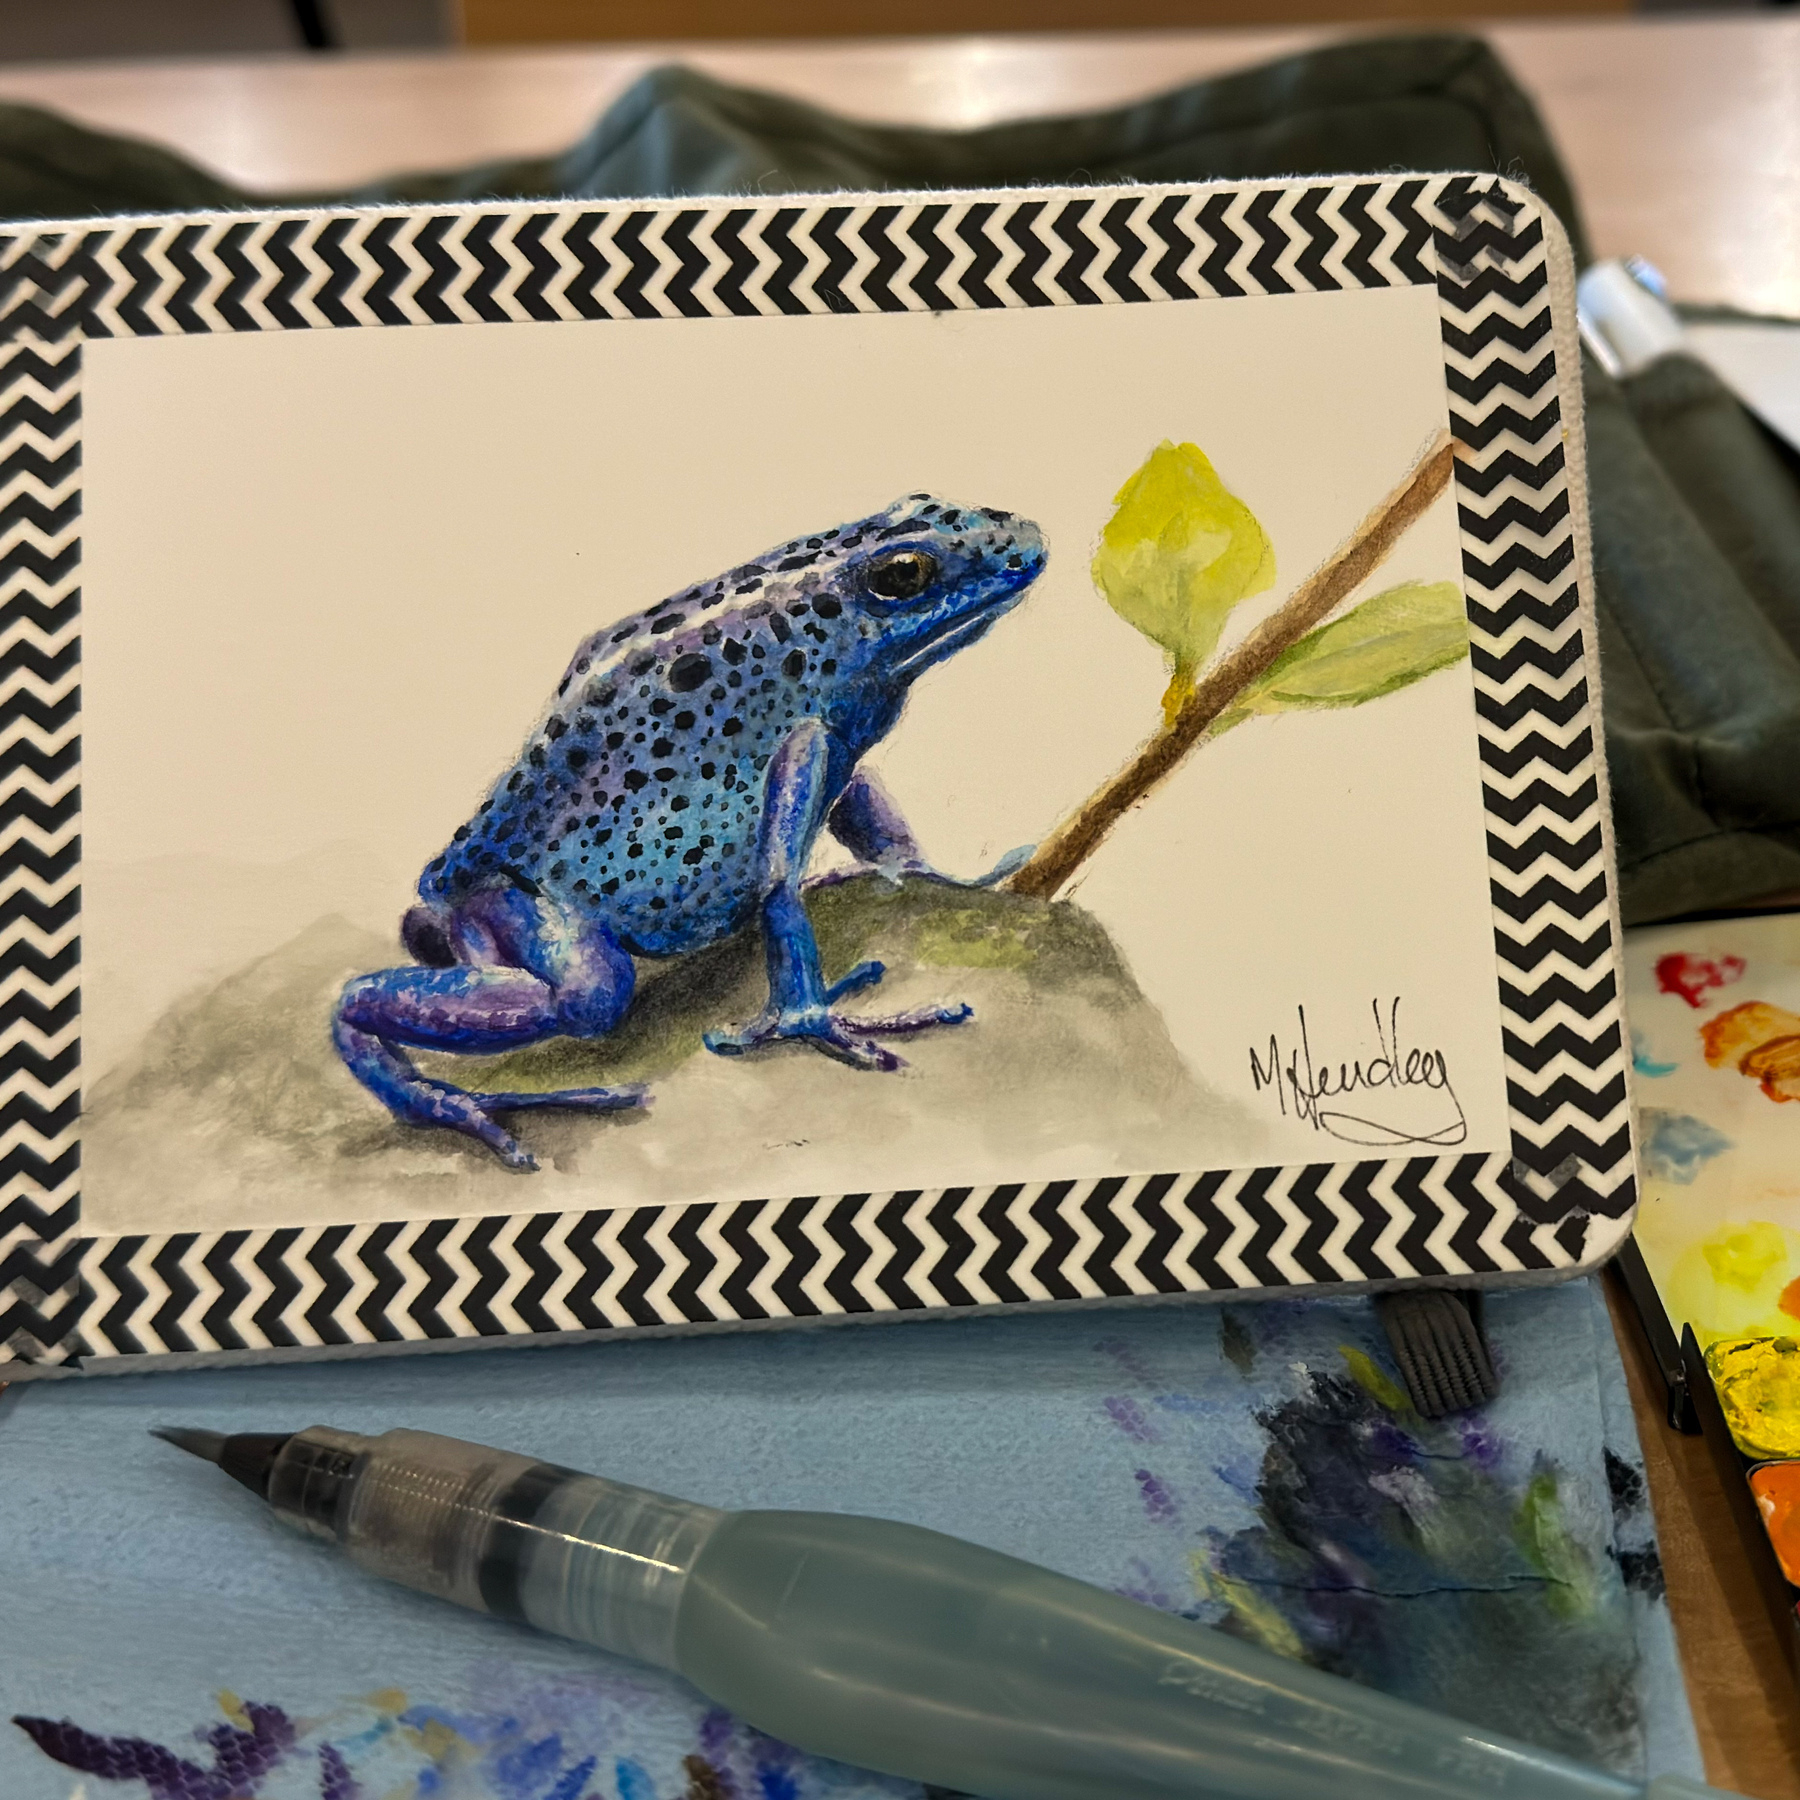 Watercolor painting of a blue poison dart frog perched on a rock with a single yellow-green leaf in the background, presented on a sketchbook with a chevron pattern border. Art supplies, including a water brush pen, are visible around the sketchbook.